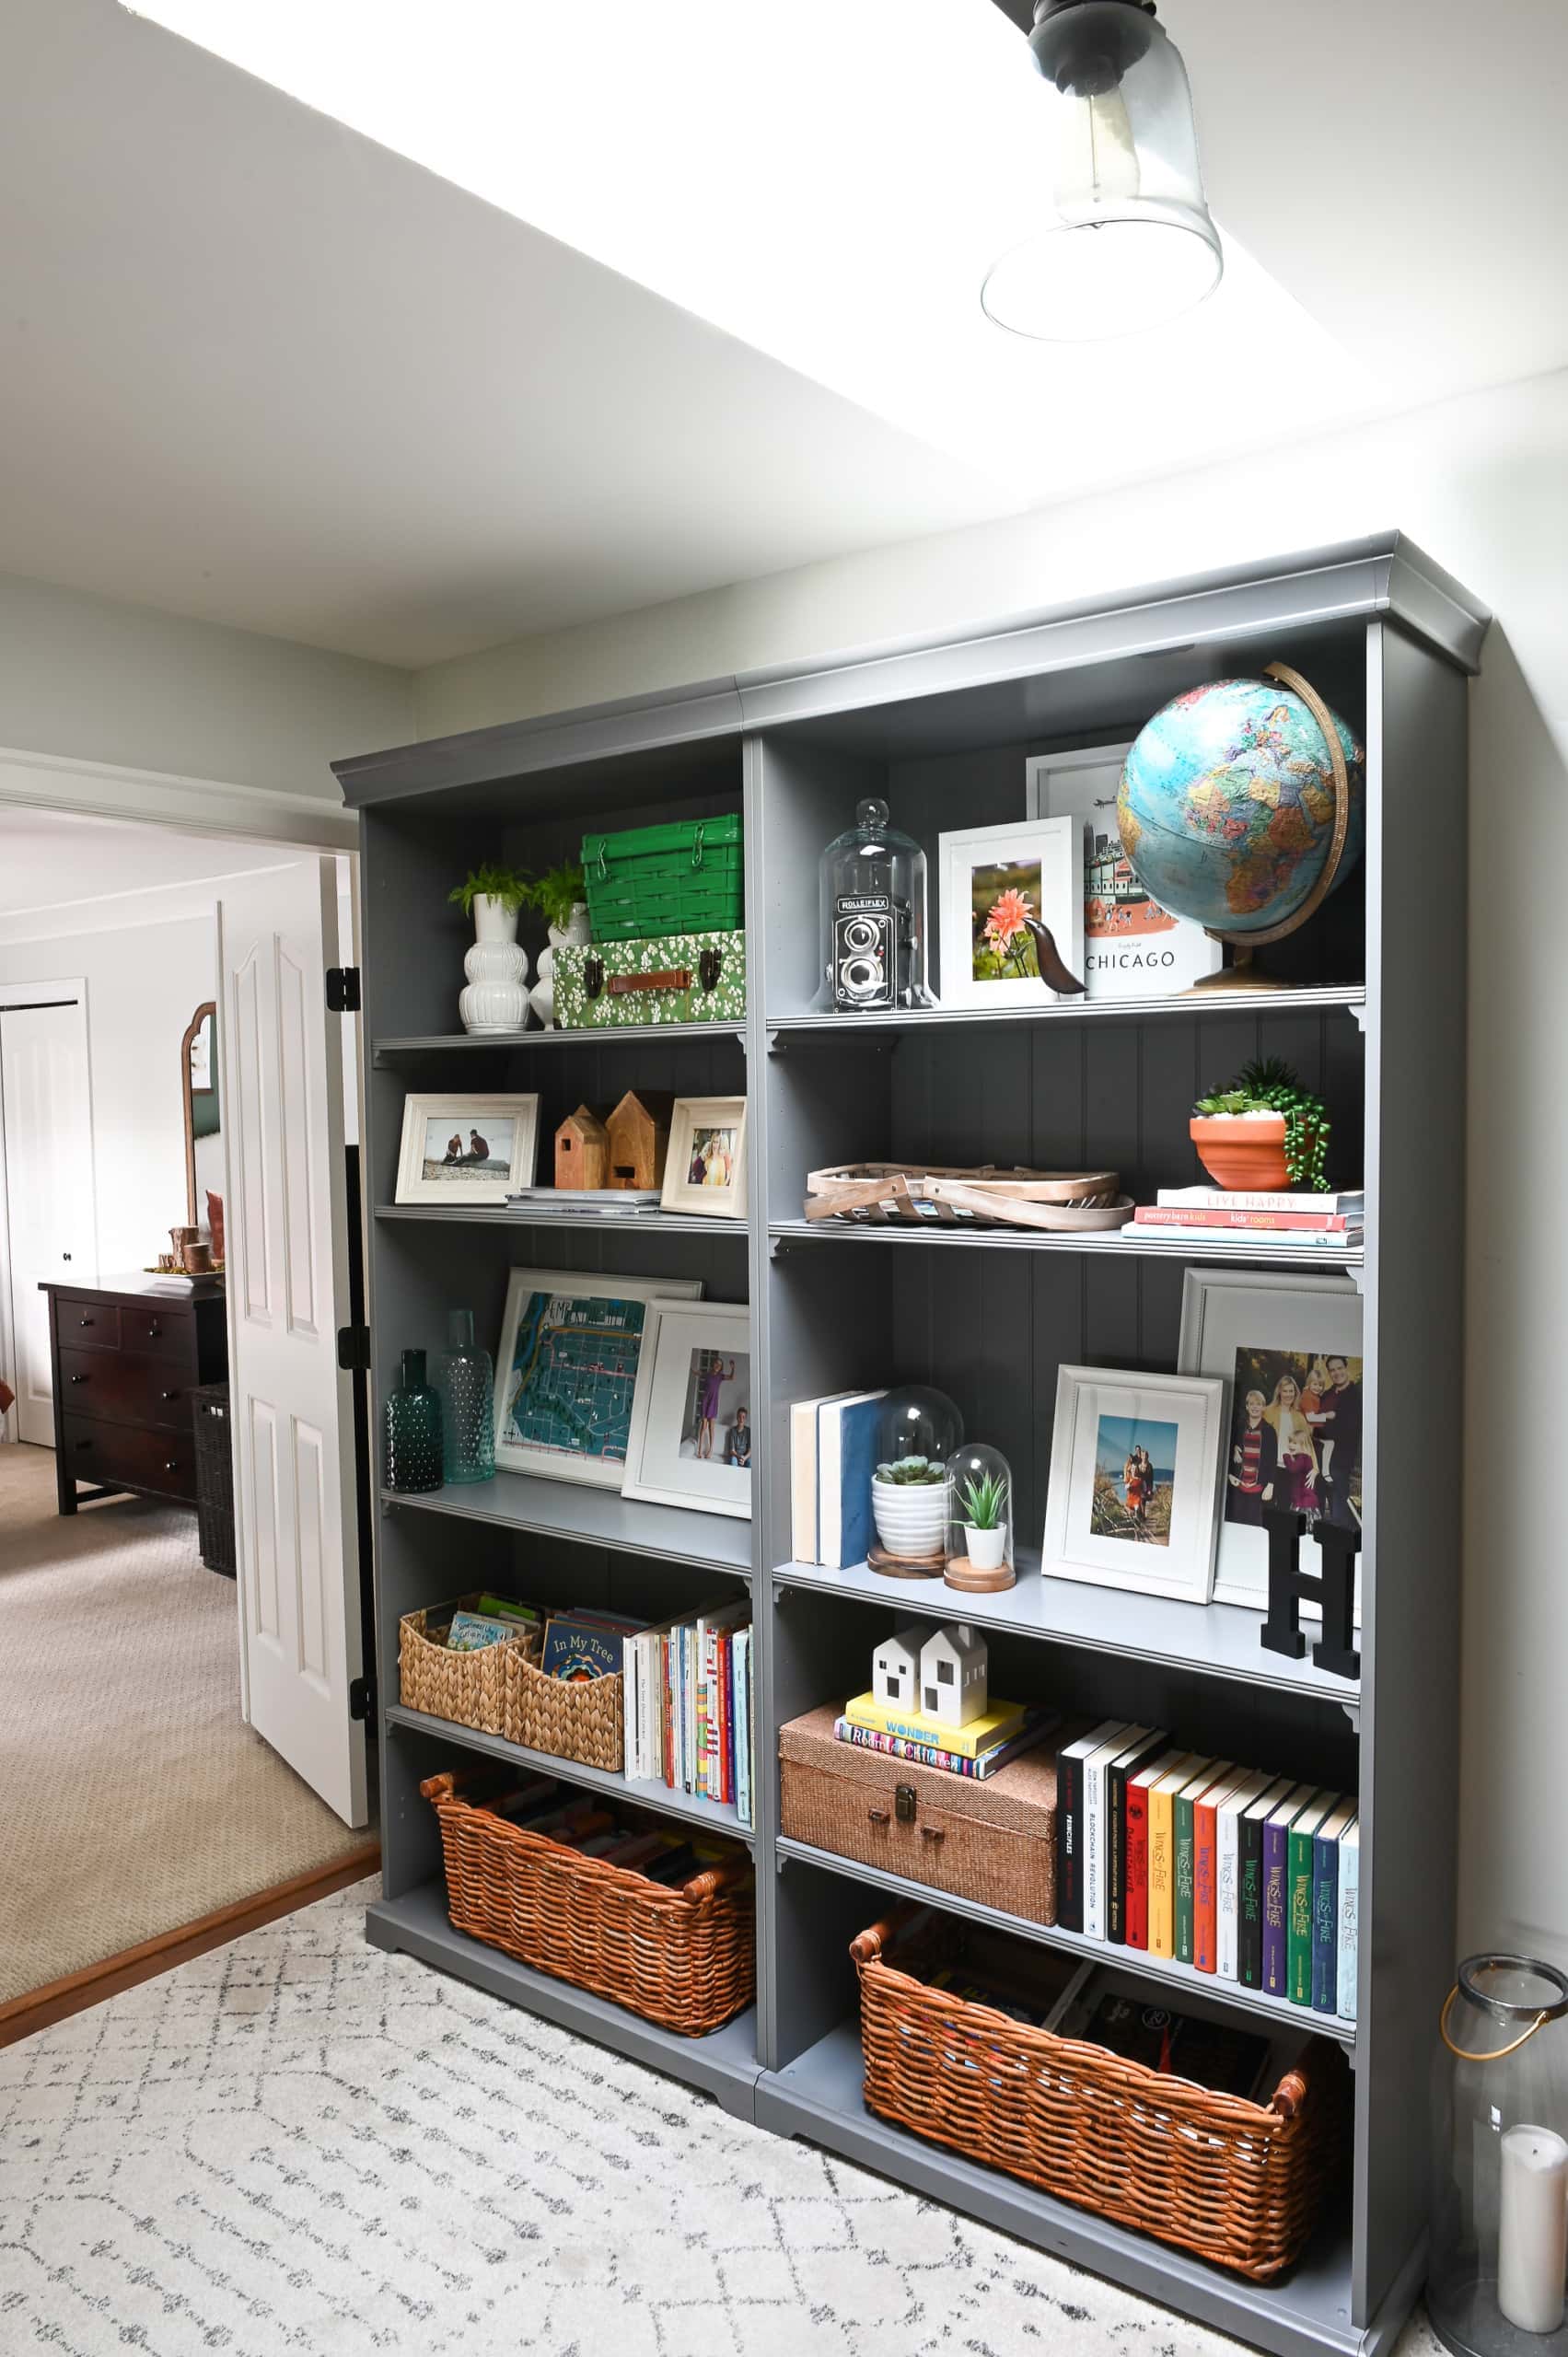 Styled bookshelves in a family-friendly home